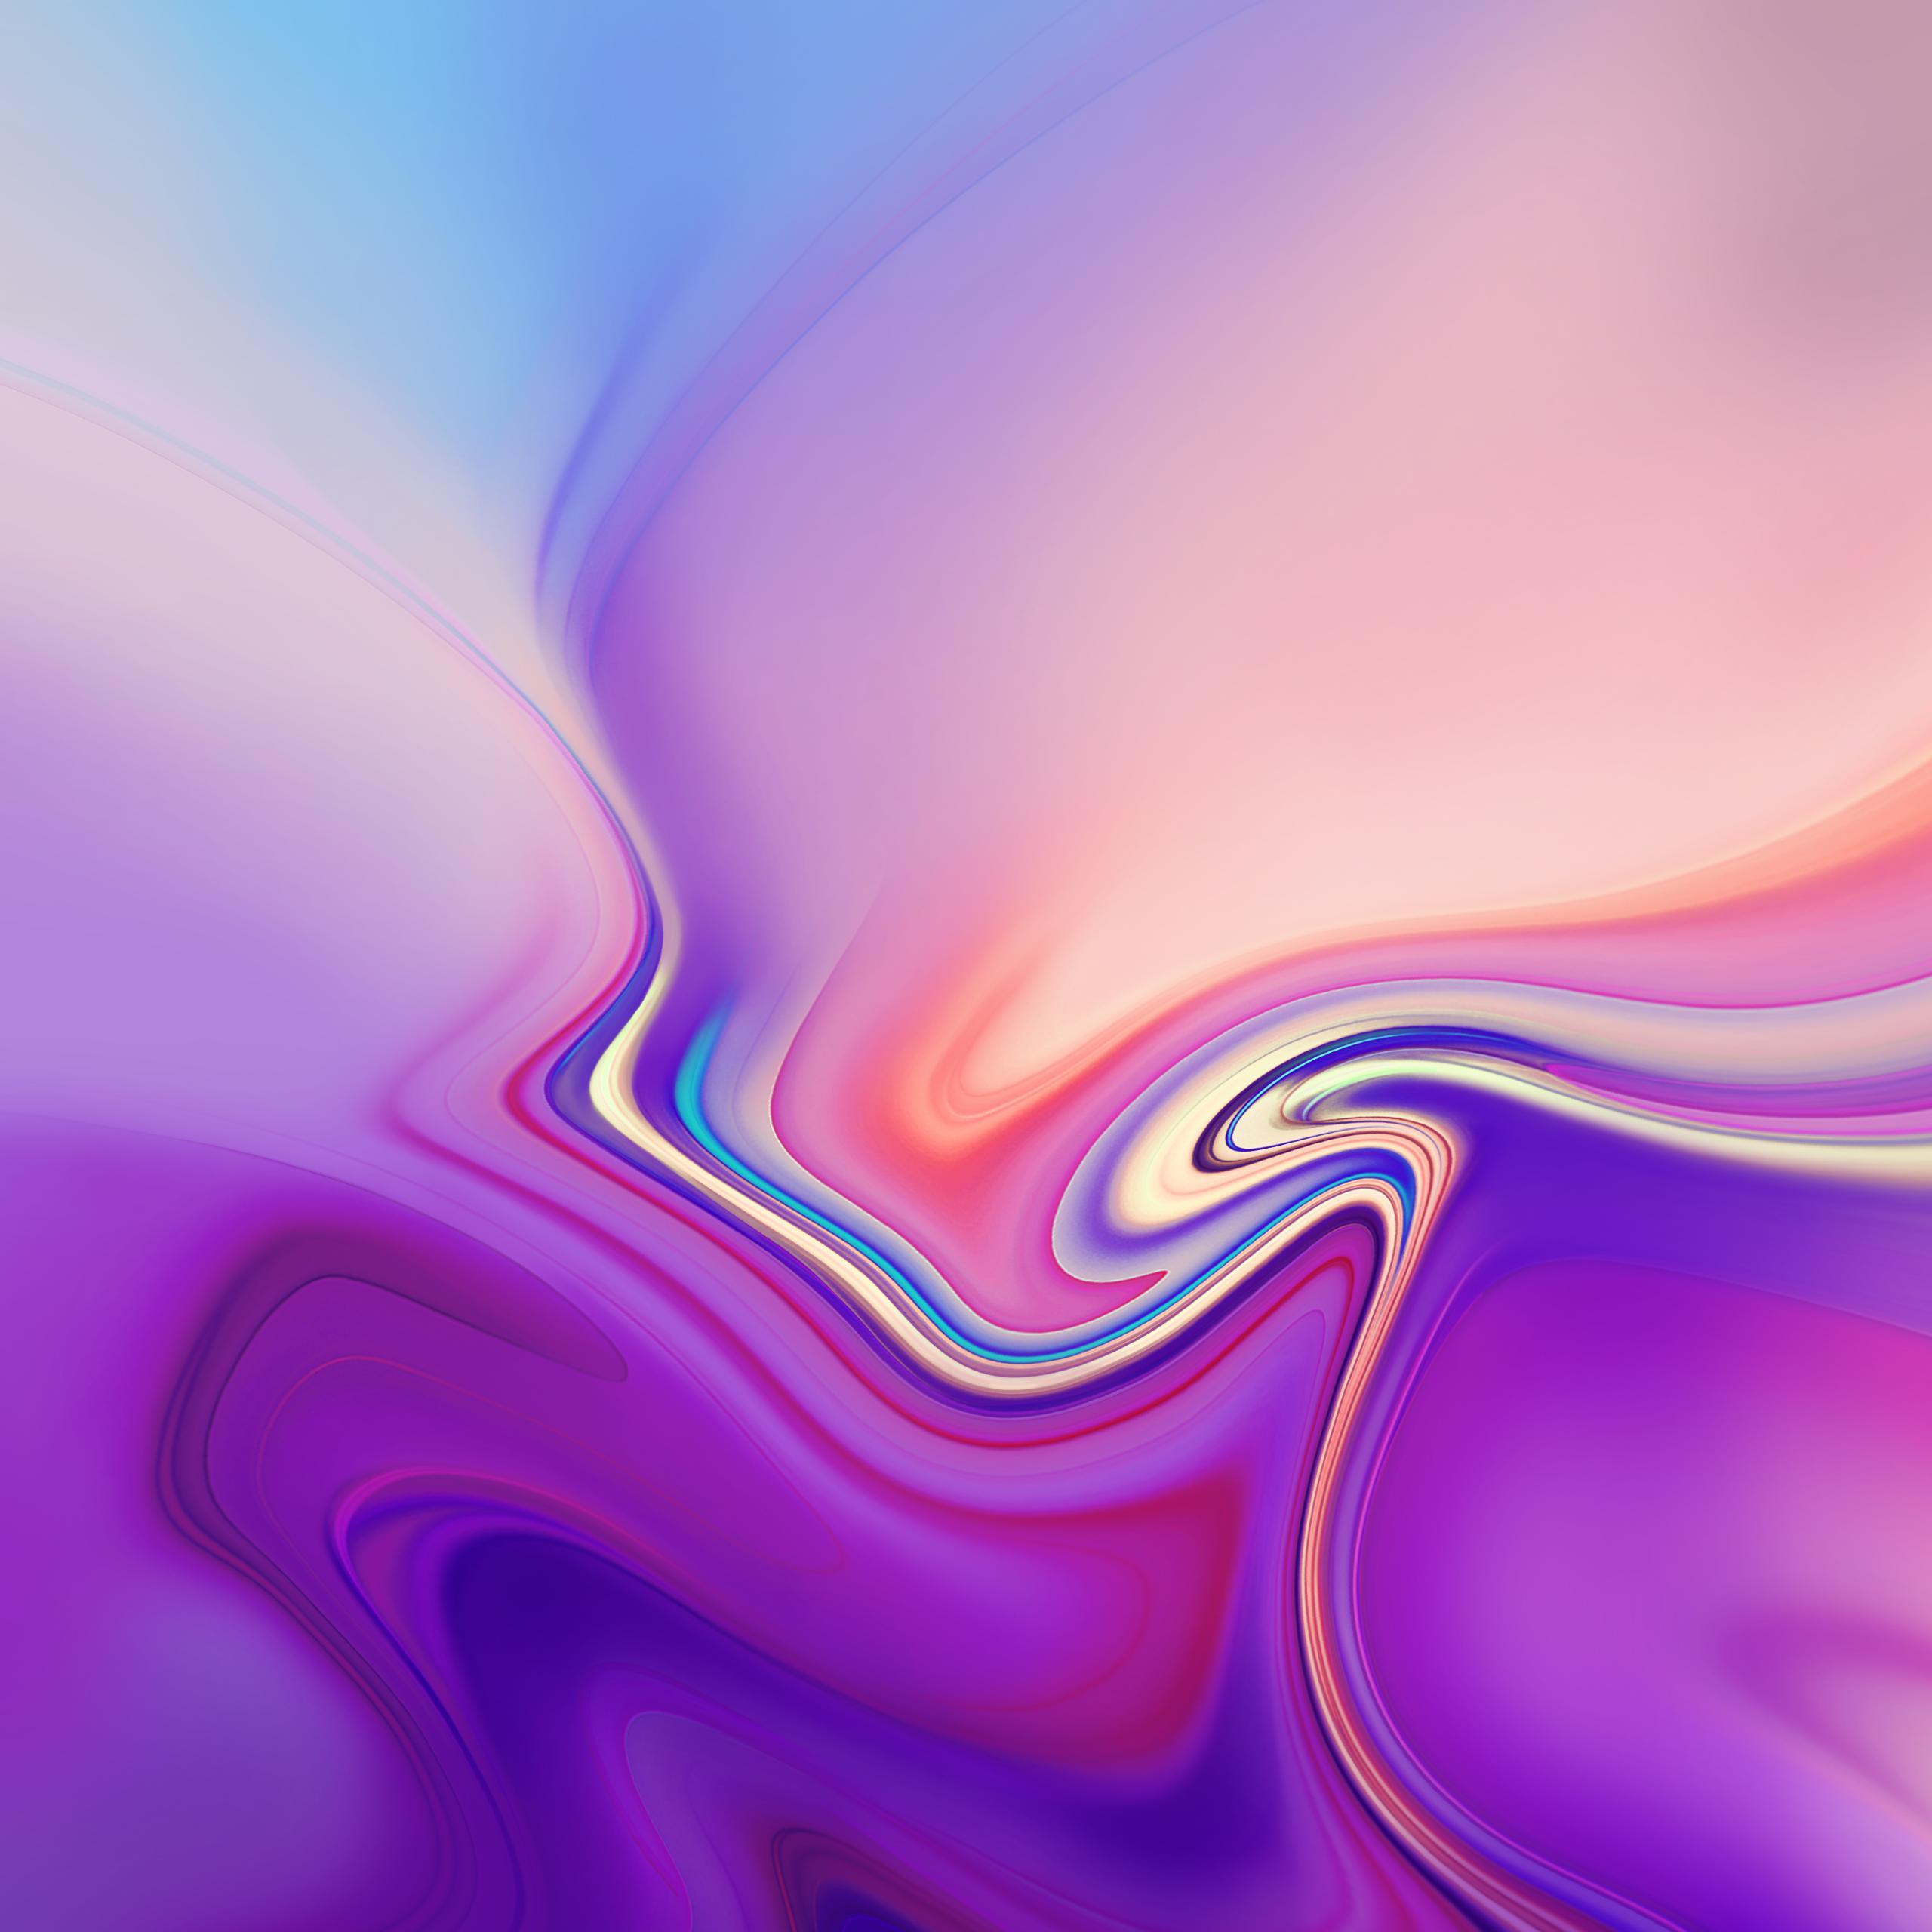 Download the official Galaxy Tab S wallpapers here